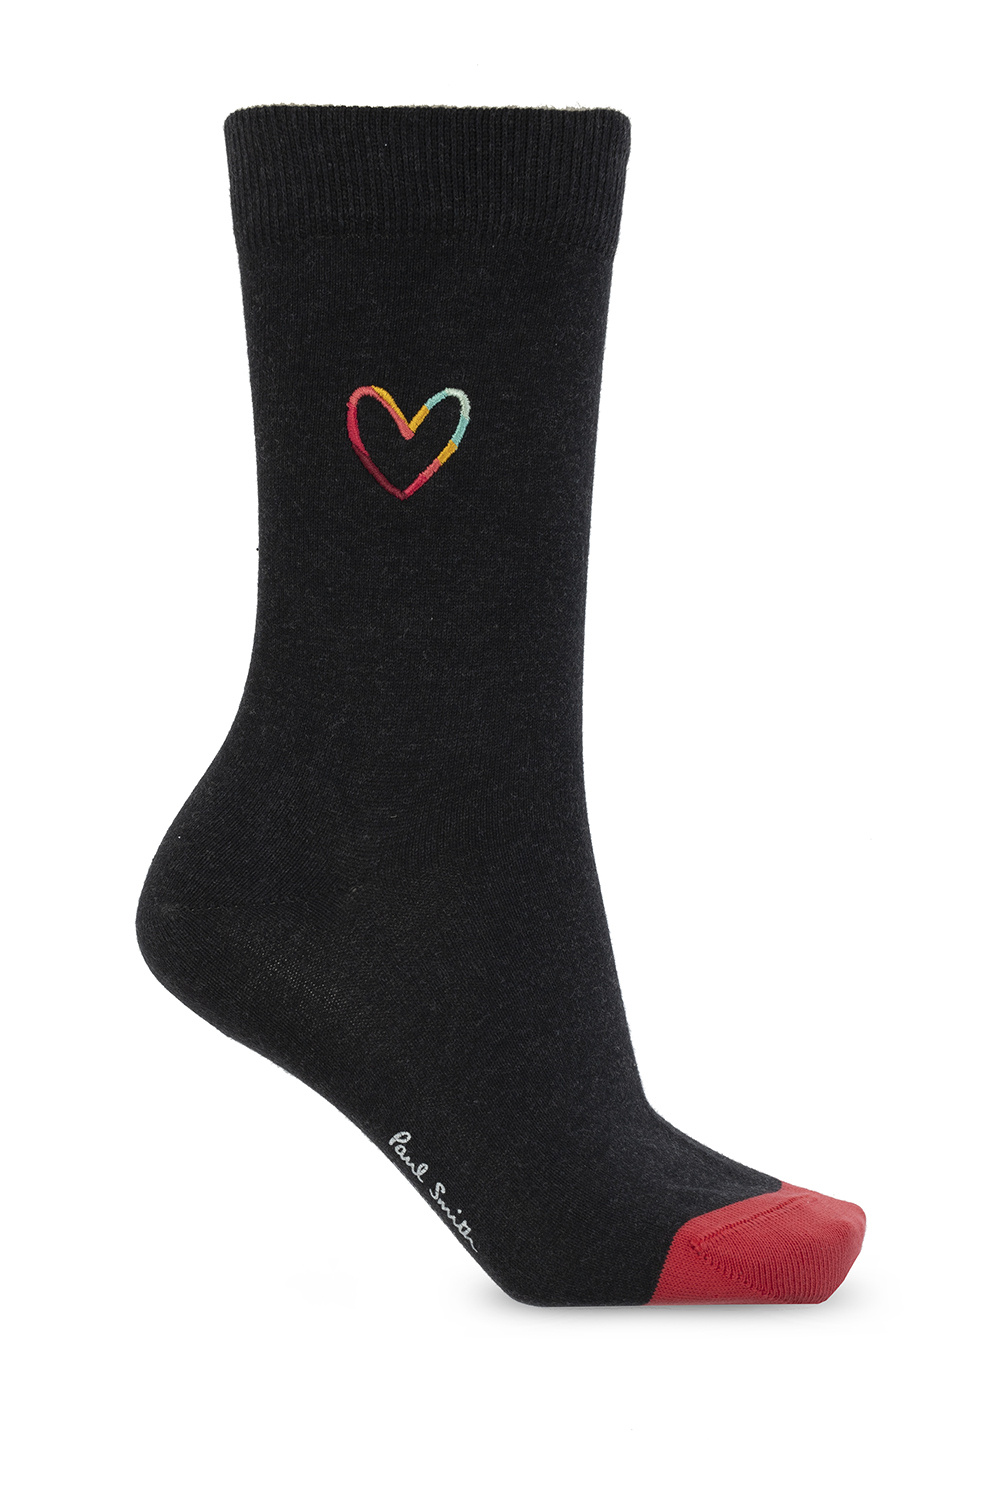 Paul Smith Embroidered socks